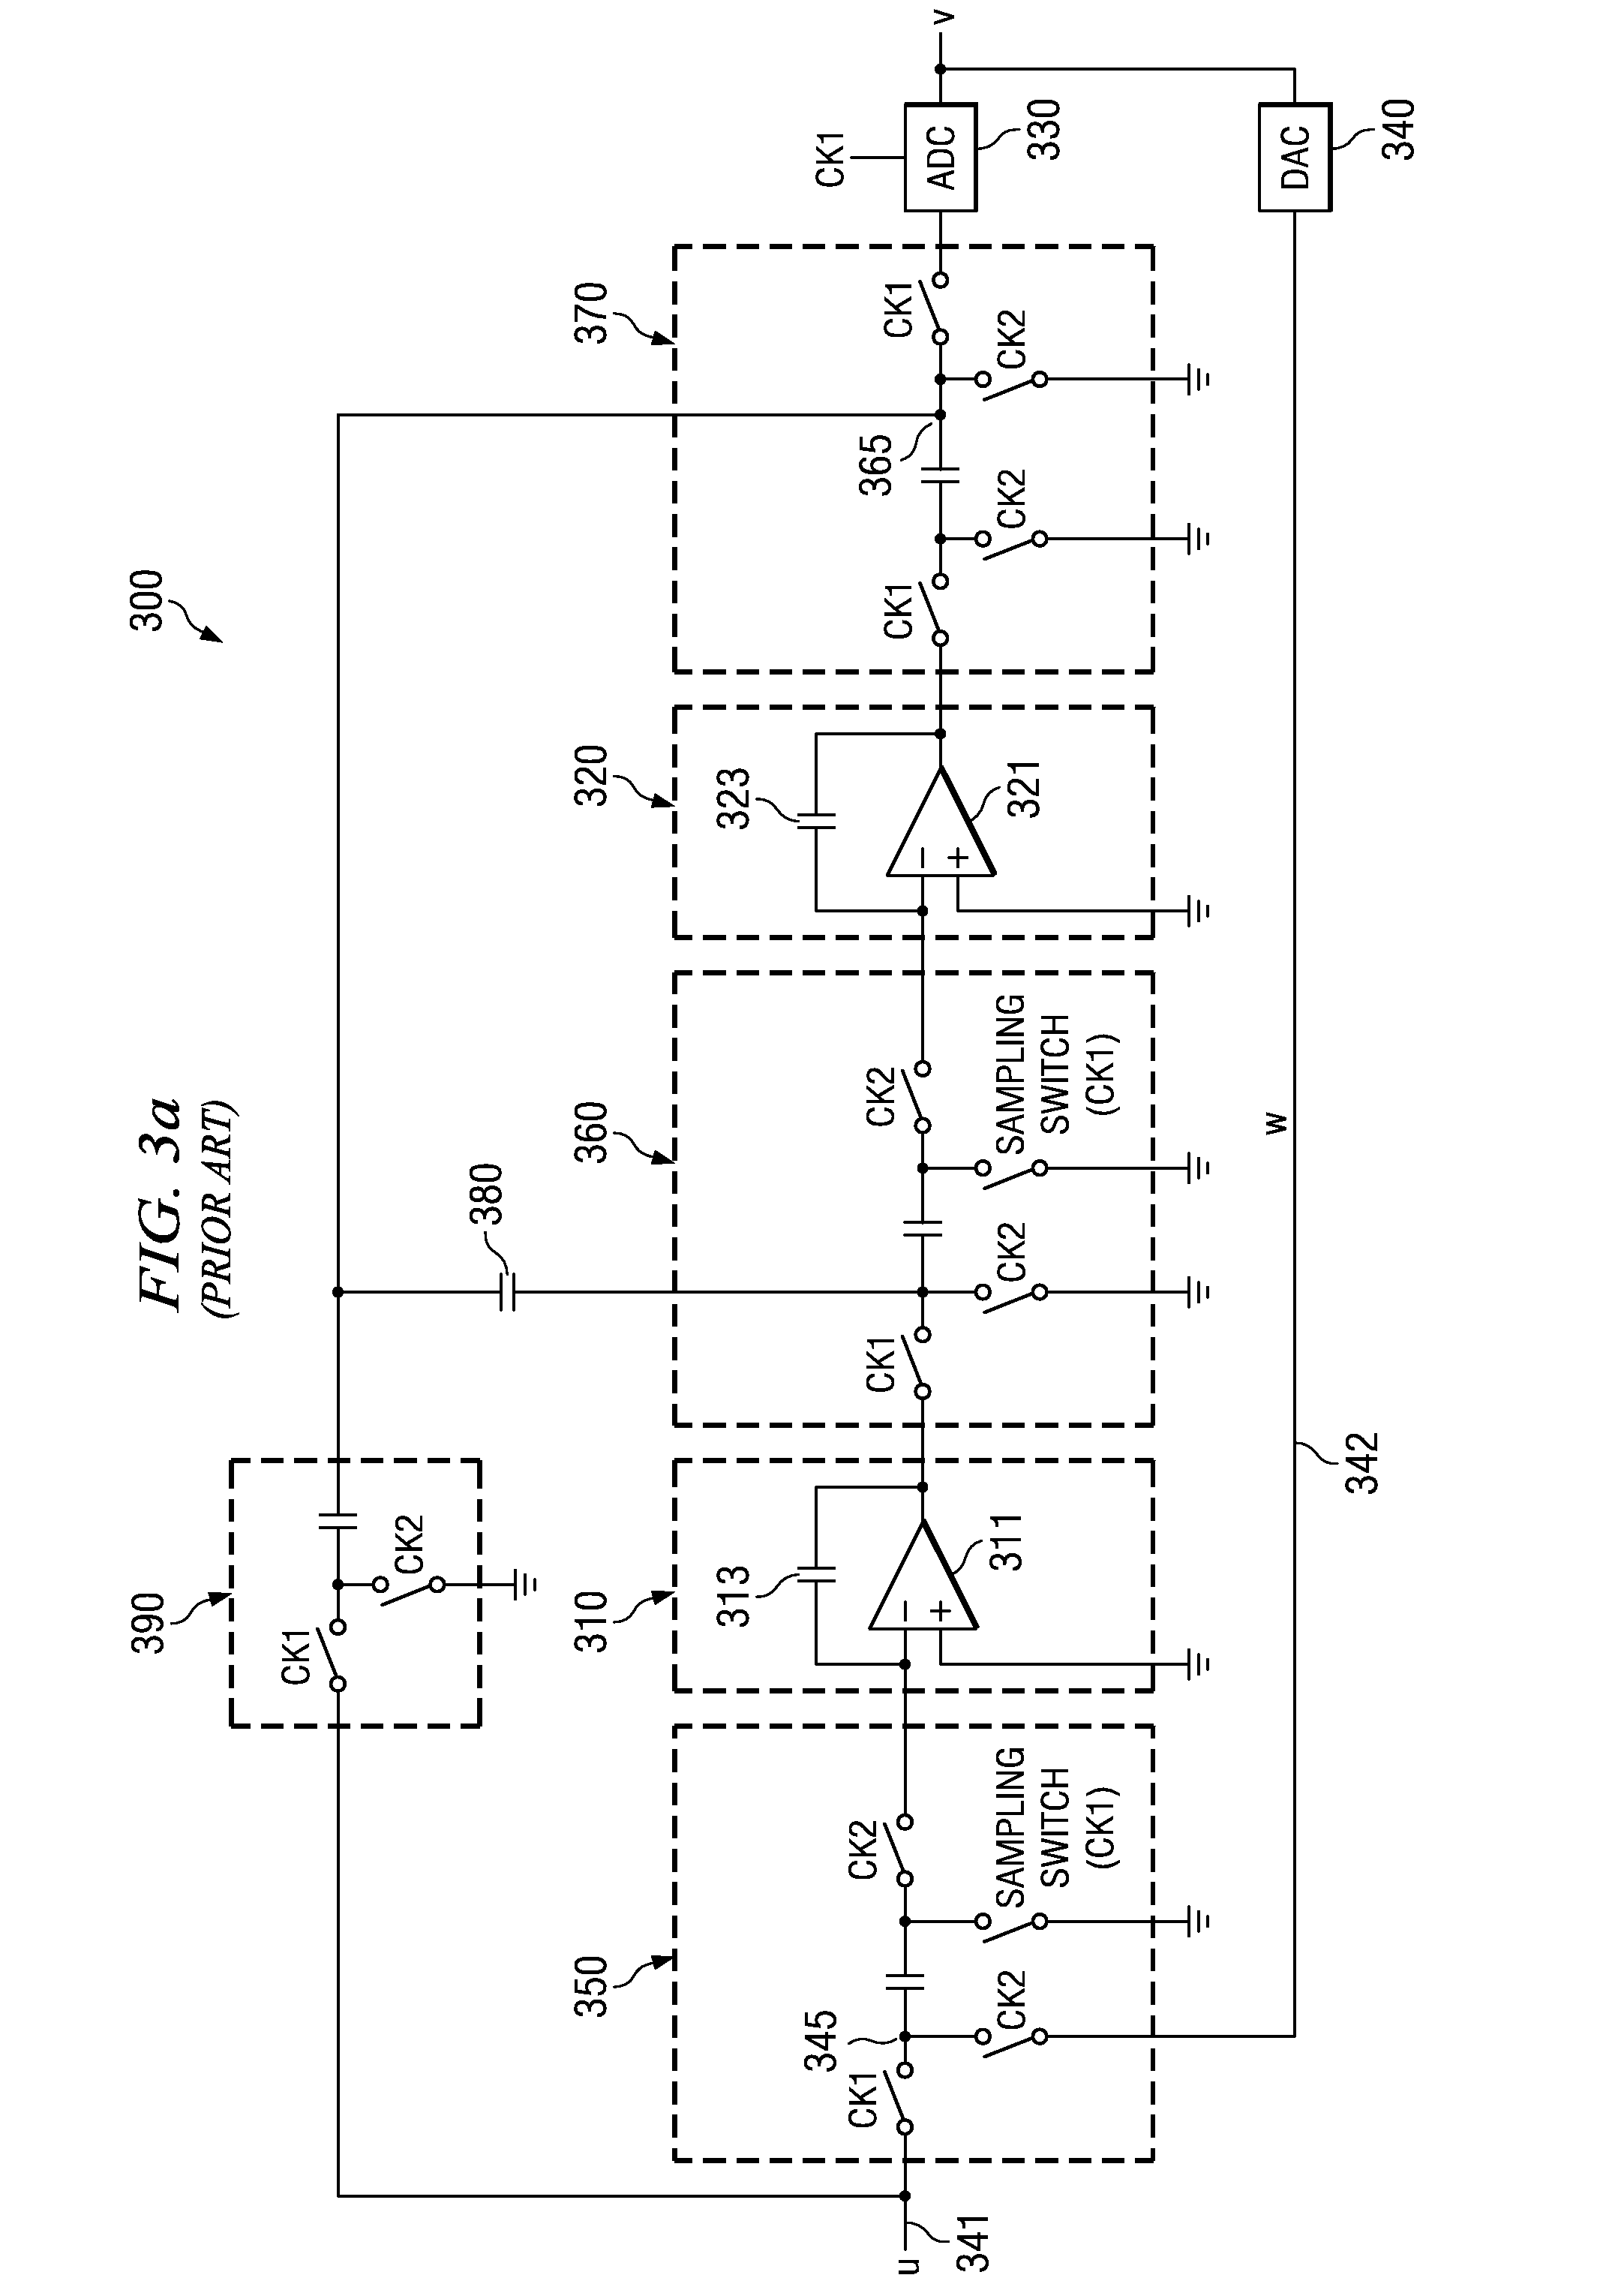 Systems and methods for kickback reduction in an ADC